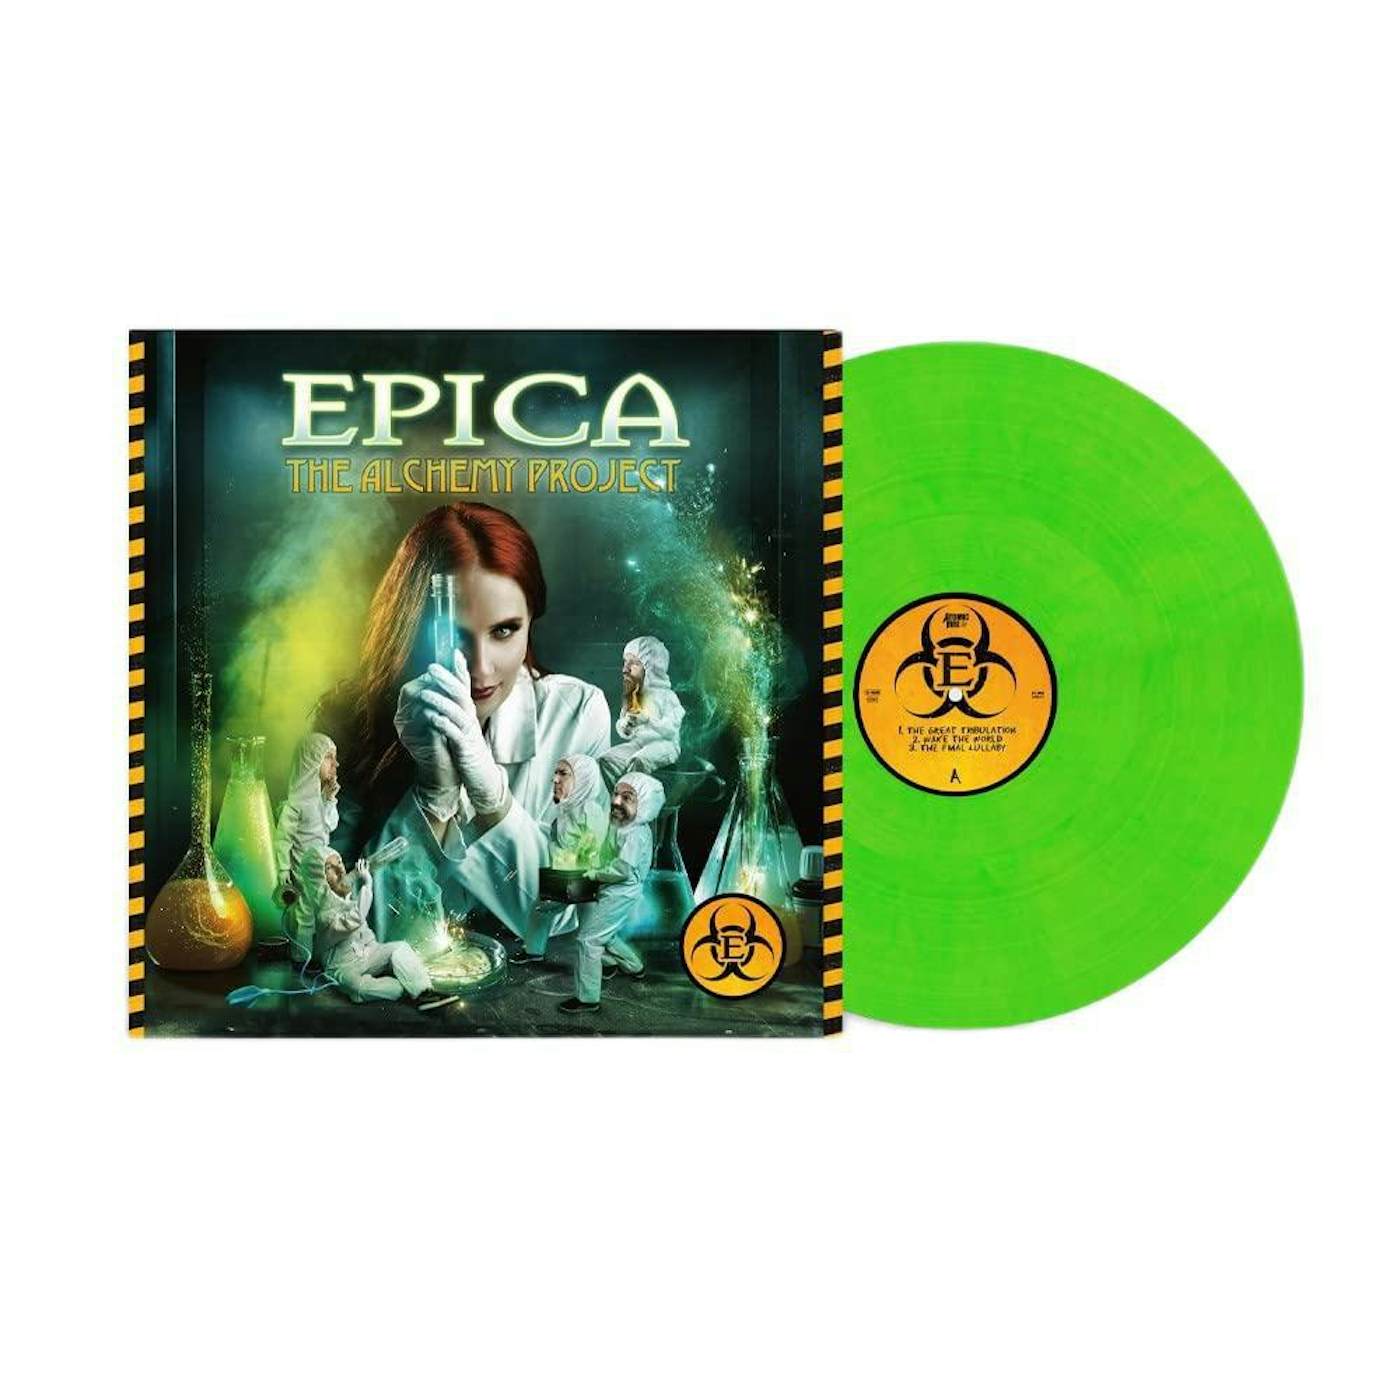 Epica The Alchemy Project (Toxic Green Marbled) Vinyl Record